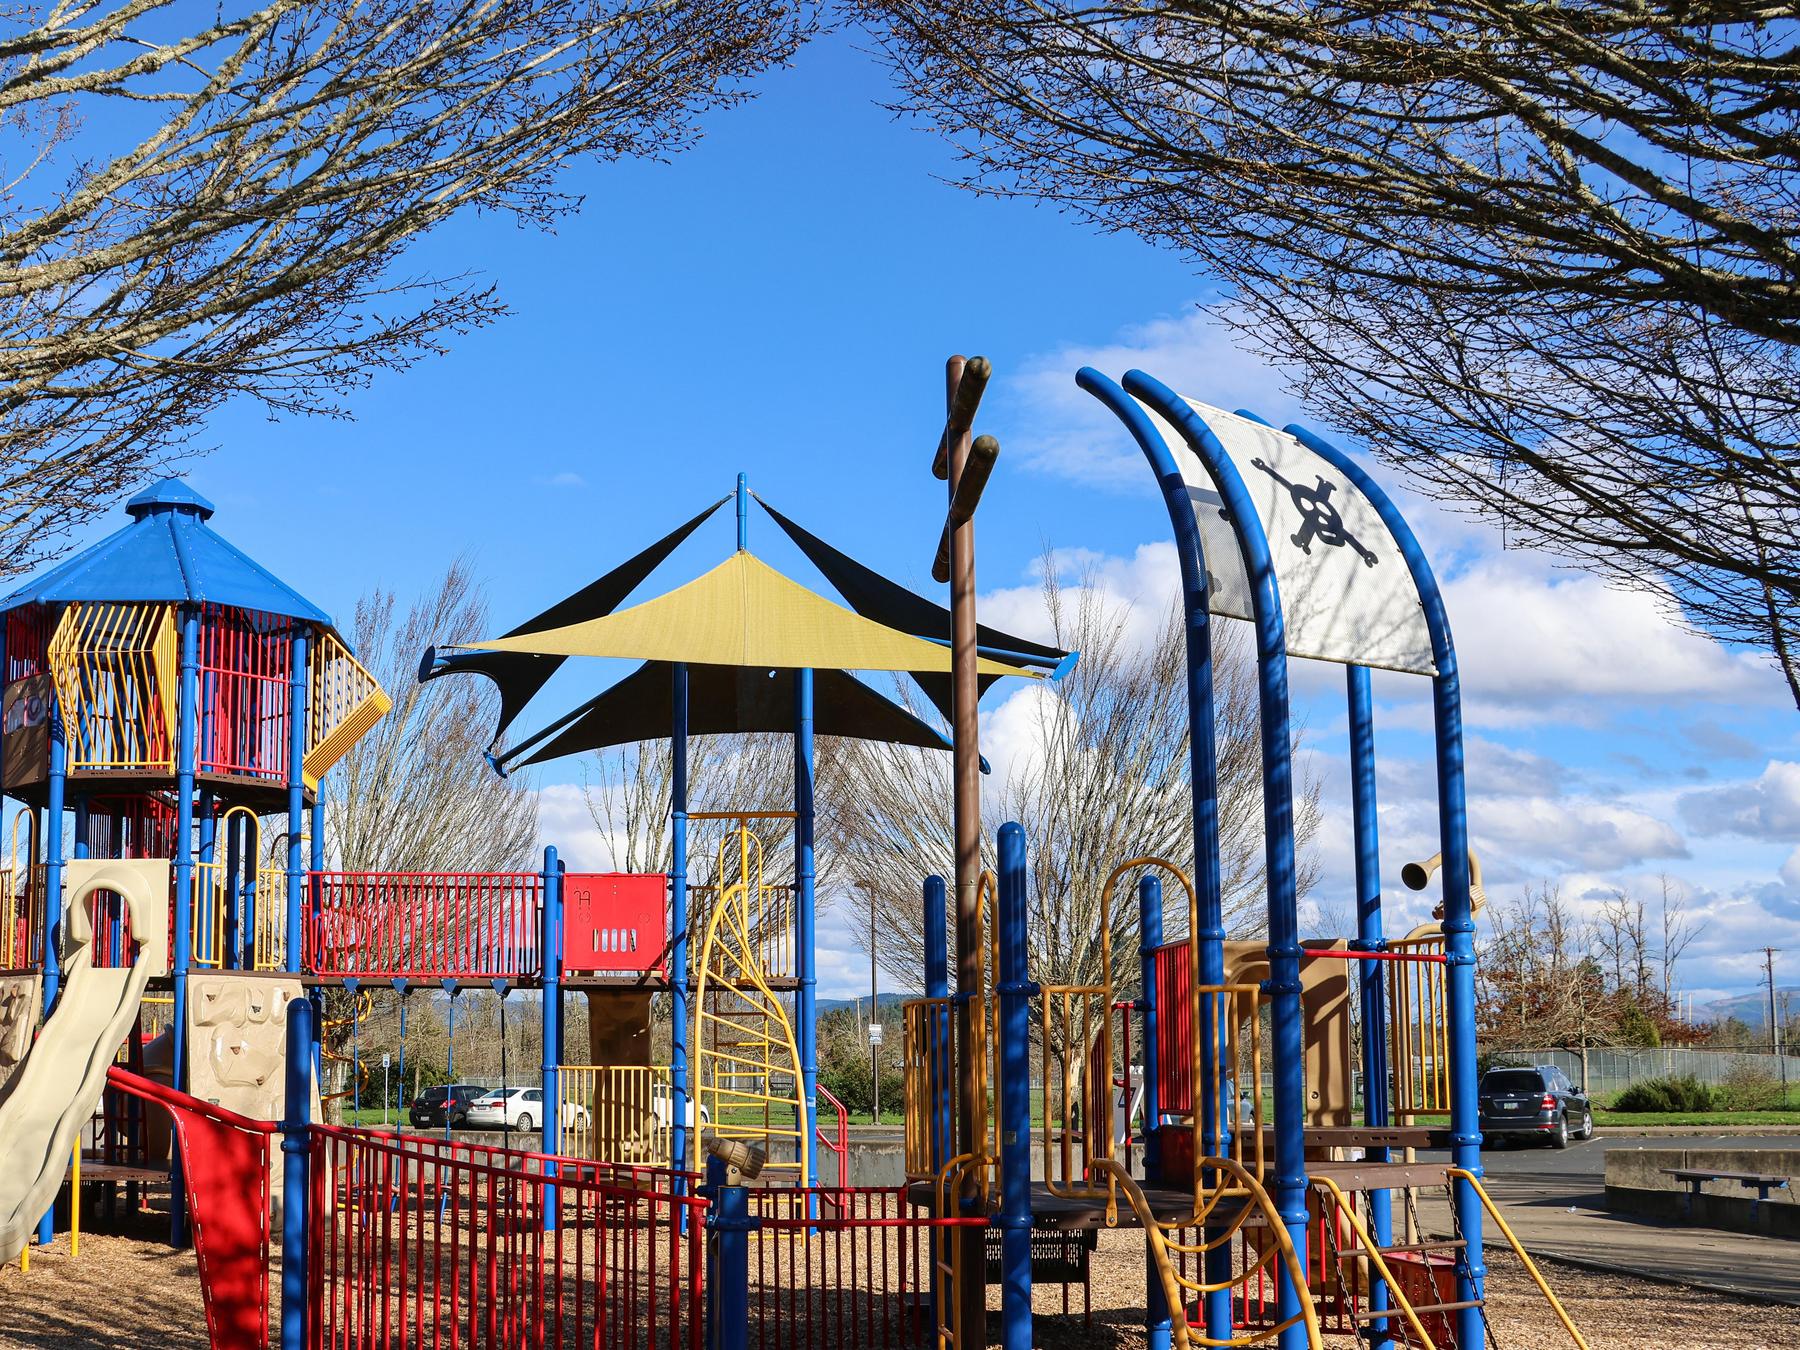 A large colorful play structure at Lively Park on a sunny day